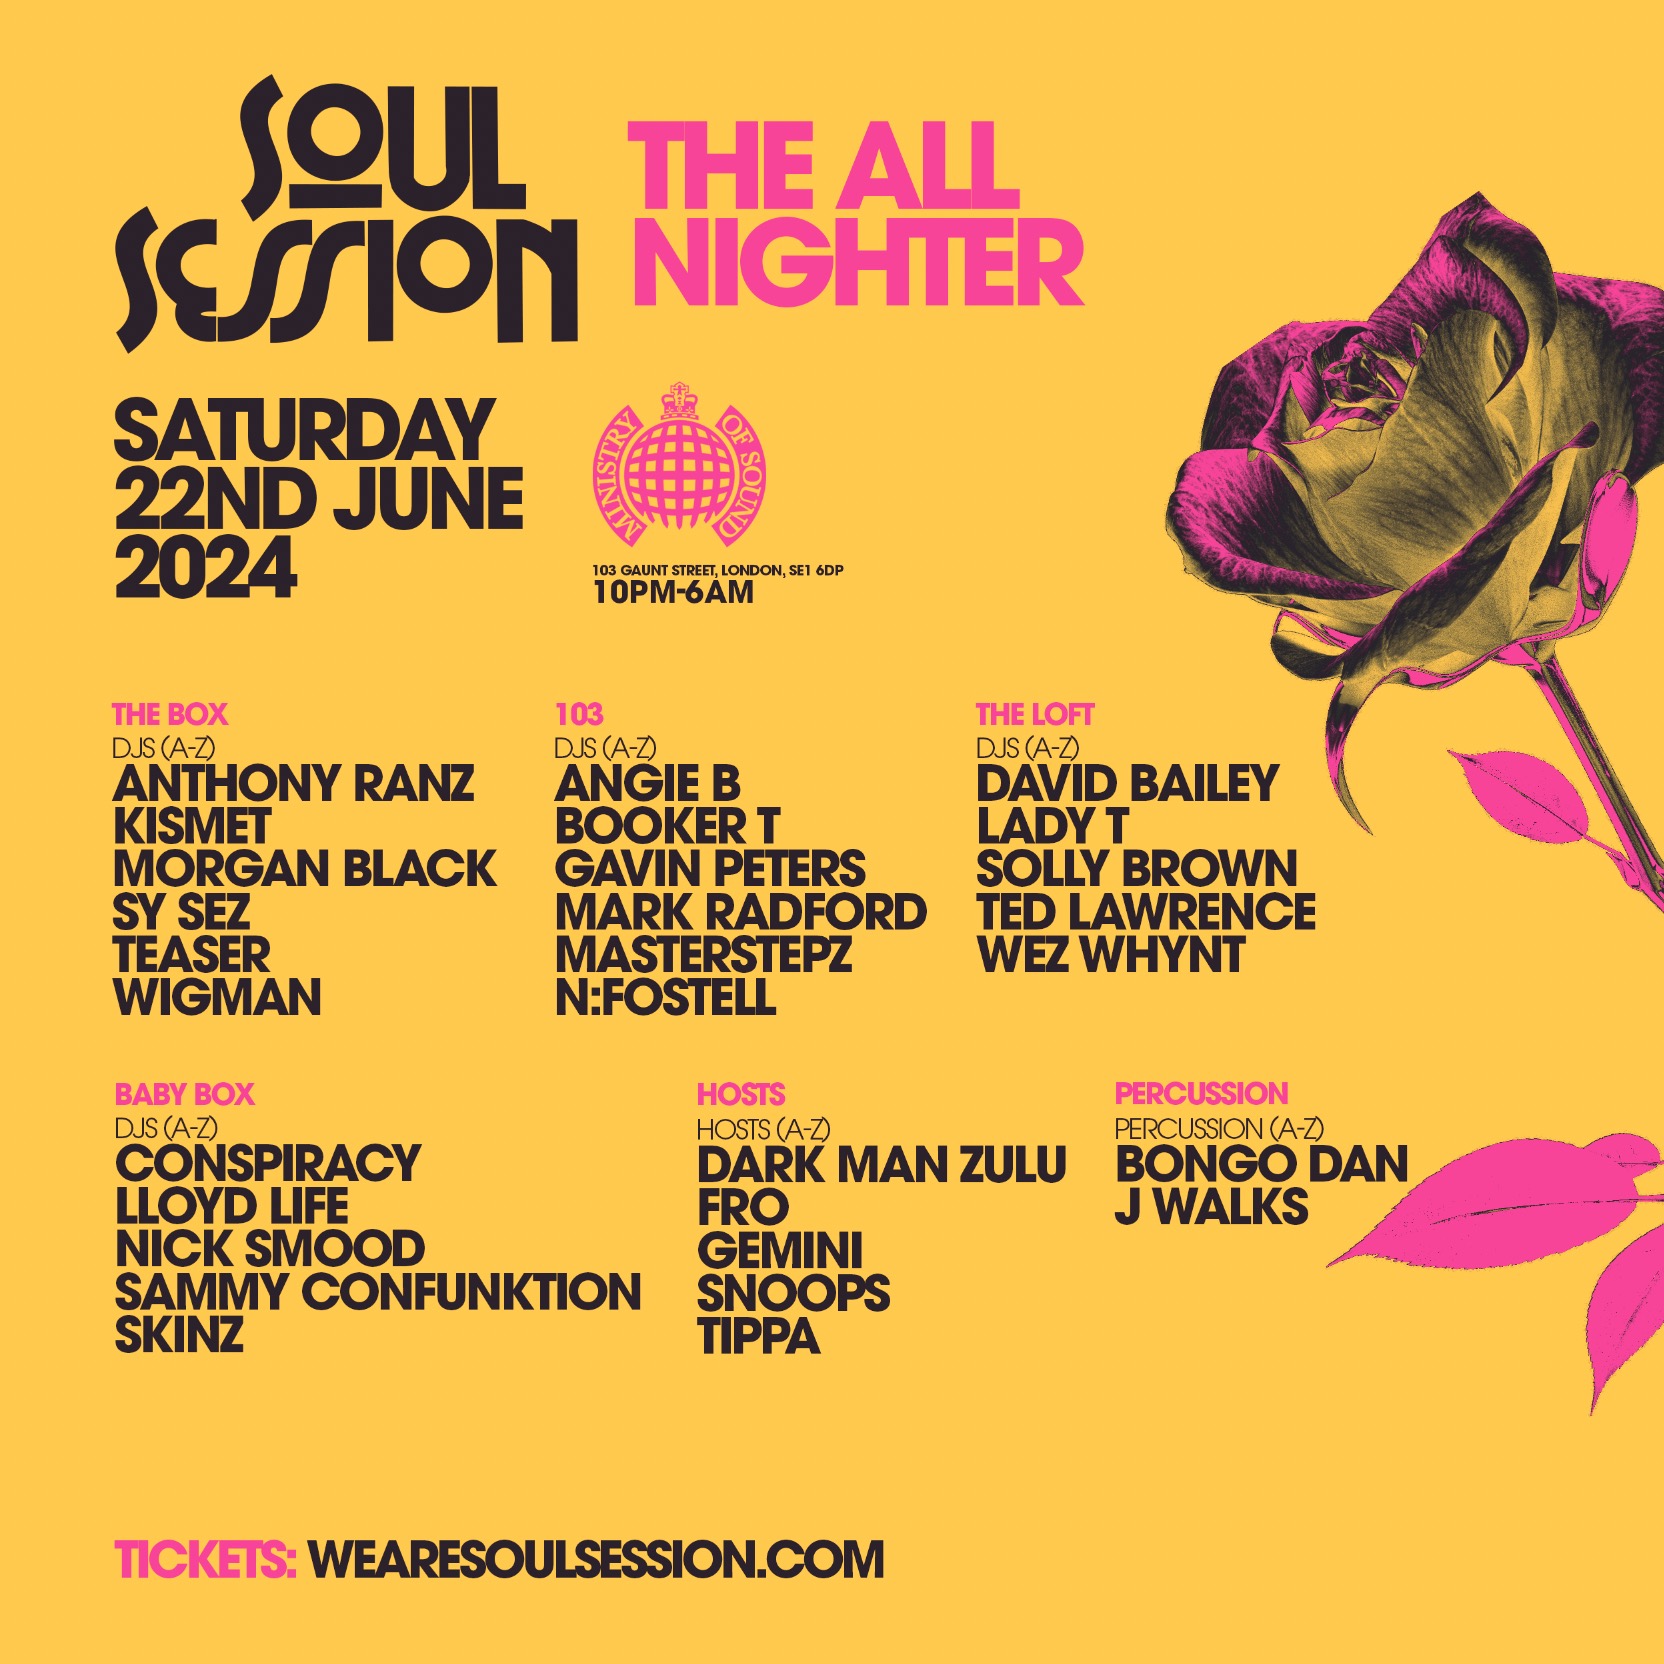 TICKETS For The All Nighter - Sat 22nd June | 10PM-6AM @ Ministry Of Sound, SE1 6DP thumbnail